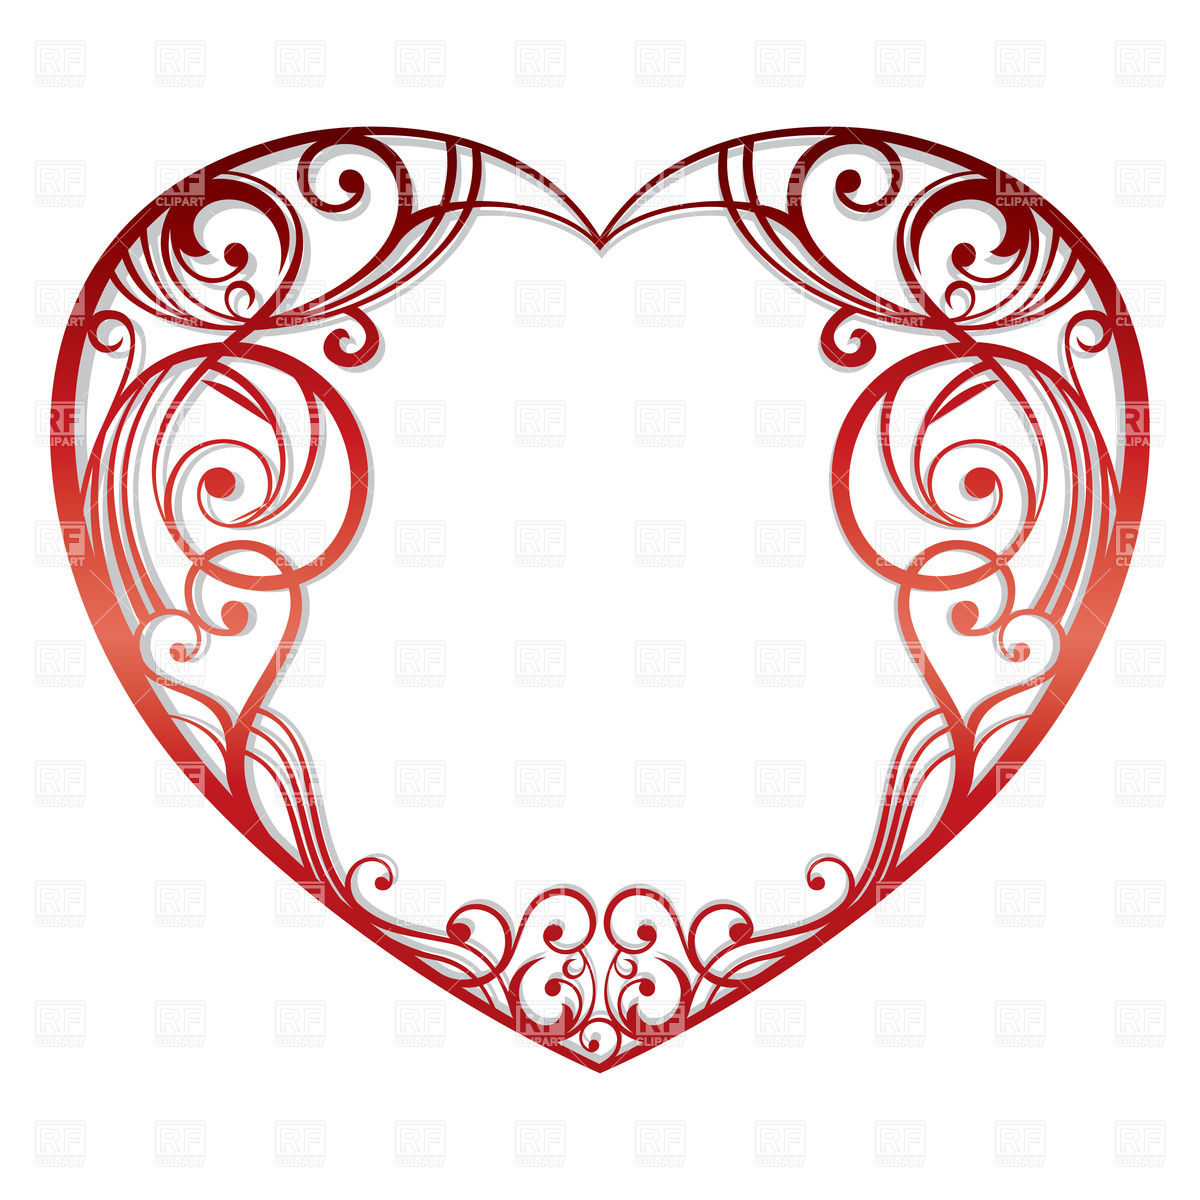 Heart Silhouette 37219 Download Royalty Free Vector Clipart  Eps